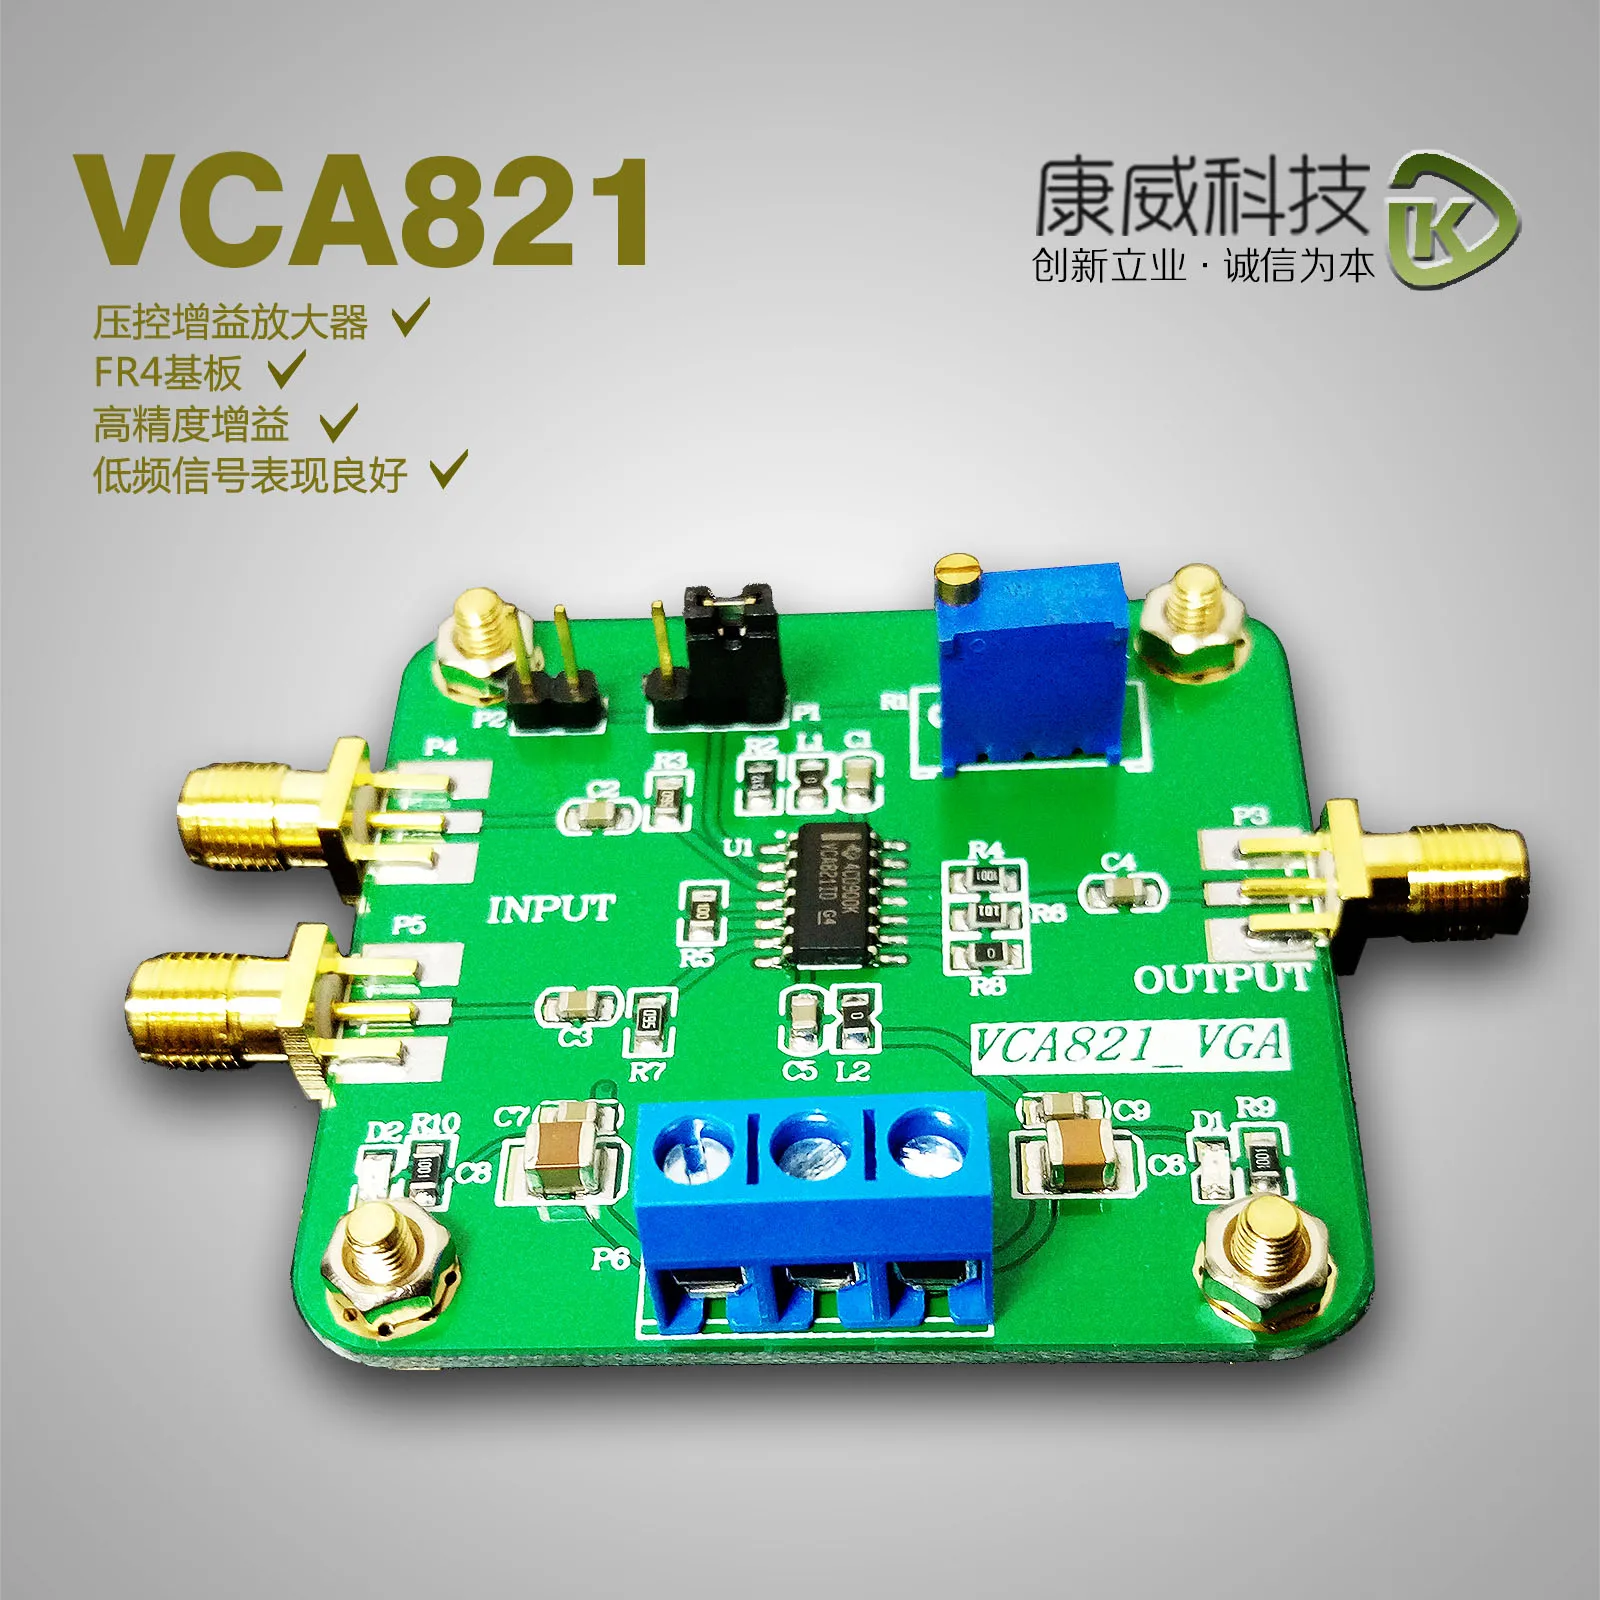 

Voltage controlled gain amplifier, VCA821 module, electronic contest module, programmable gain amplifier, genuine products